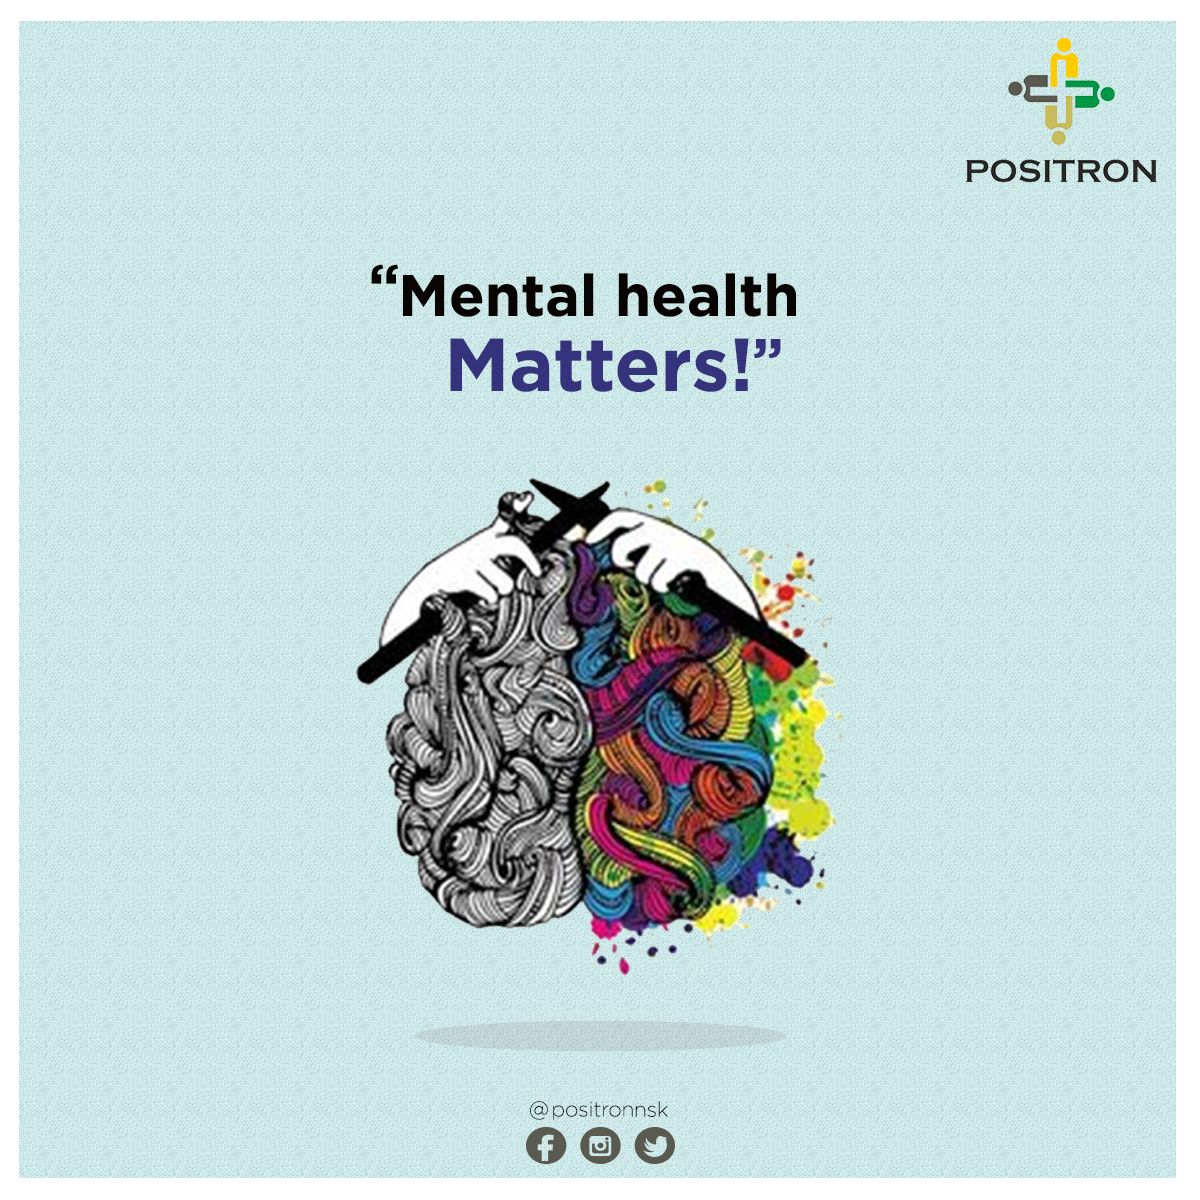 Your mental health is the real treasure you have. Make sure you keep it safe. Protect it. And give all the care it needs.

#Positron #Repost #DailyDoseOfPositivity #DailyMotivation #nashikgram #mentalhealth #mentalhealthmatters #mentalhealthquotes #mentalhealthsupport